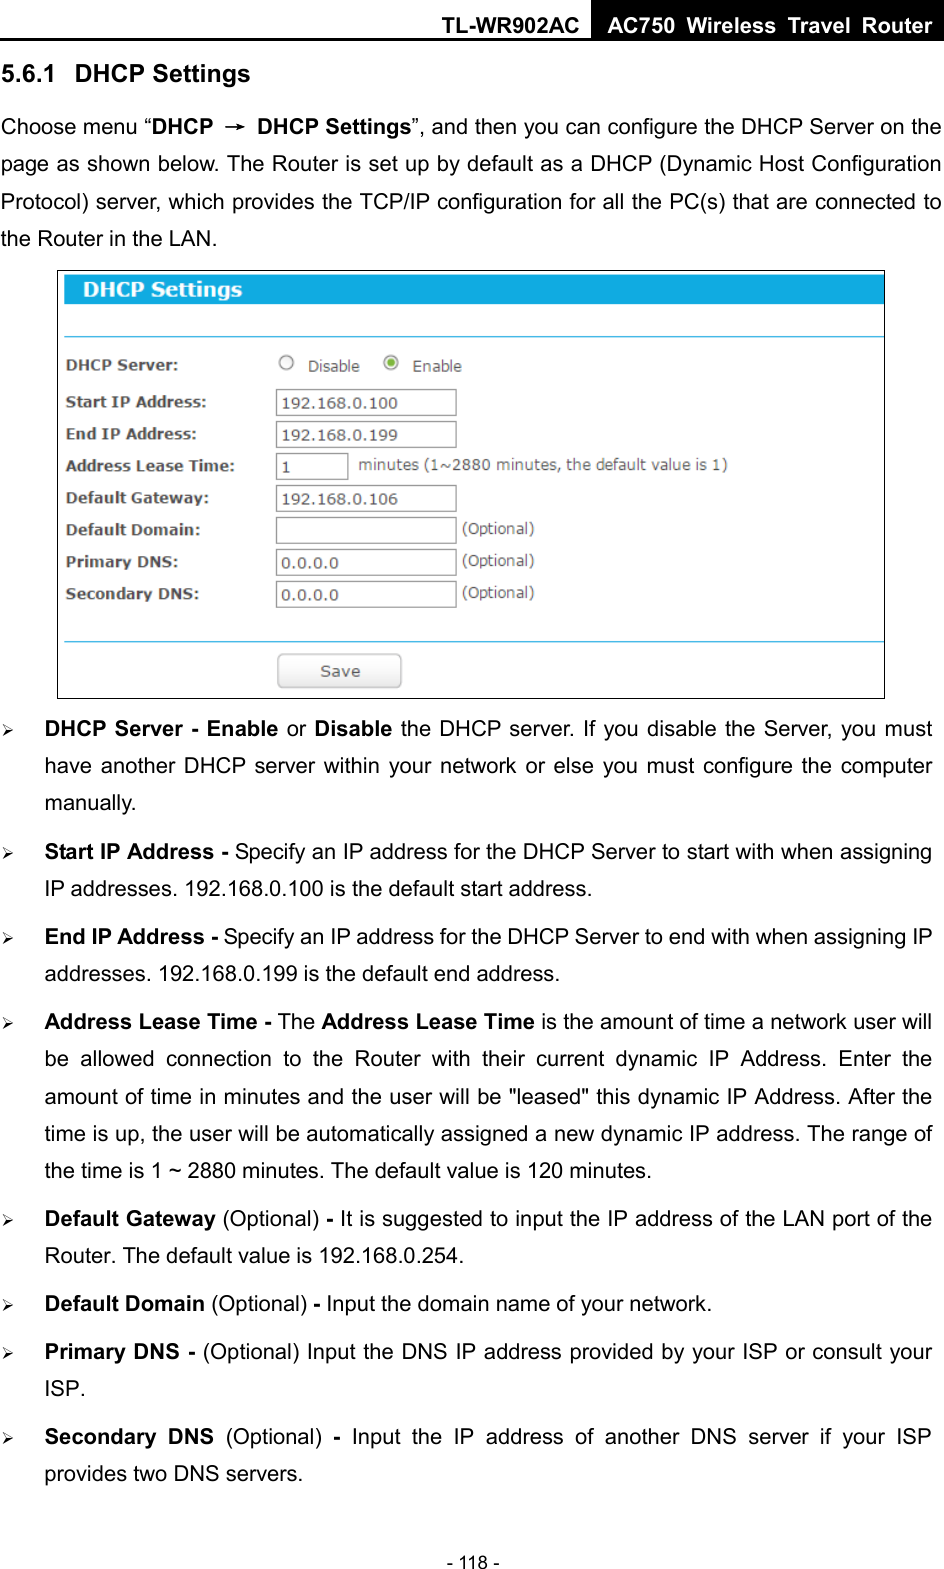 TL-WR902AC AC750  Wireless Travel Router  - 118 - 5.6.1 DHCP Settings Choose menu “DHCP → DHCP Settings”, and then you can configure the DHCP Server on the page as shown below. The Router is set up by default as a DHCP (Dynamic Host Configuration Protocol) server, which provides the TCP/IP configuration for all the PC(s) that are connected to the Router in the LAN.     DHCP Server - Enable or Disable the DHCP server. If you disable the Server, you must have another DHCP server within your network or else you must configure the computer manually.  Start IP Address - Specify an IP address for the DHCP Server to start with when assigning IP addresses. 192.168.0.100 is the default start address.  End IP Address - Specify an IP address for the DHCP Server to end with when assigning IP addresses. 192.168.0.199 is the default end address.  Address Lease Time - The Address Lease Time is the amount of time a network user will be allowed connection to the Router with their current dynamic IP Address. Enter the amount of time in minutes and the user will be &quot;leased&quot; this dynamic IP Address. After the time is up, the user will be automatically assigned a new dynamic IP address. The range of the time is 1 ~ 2880 minutes. The default value is 120 minutes.  Default Gateway (Optional) - It is suggested to input the IP address of the LAN port of the Router. The default value is 192.168.0.254.  Default Domain (Optional) - Input the domain name of your network.  Primary DNS - (Optional) Input the DNS IP address provided by your ISP or consult your ISP.  Secondary DNS (Optional)  -  Input the IP address of another DNS server if your ISP provides two DNS servers. 